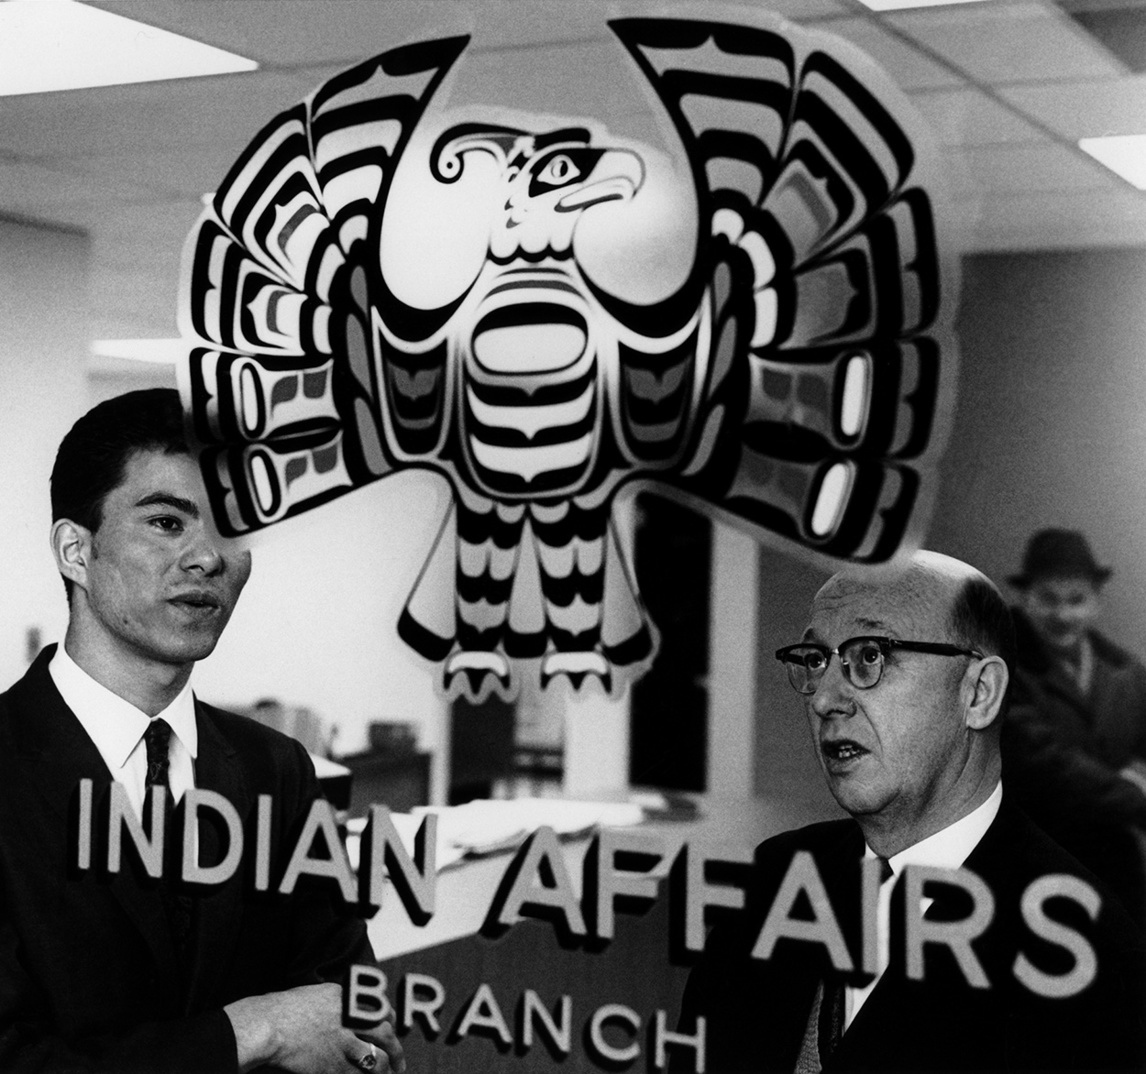 Robert Houle at the Department of Indian Affairs and Northern Development regional office in Winnipeg, 1966